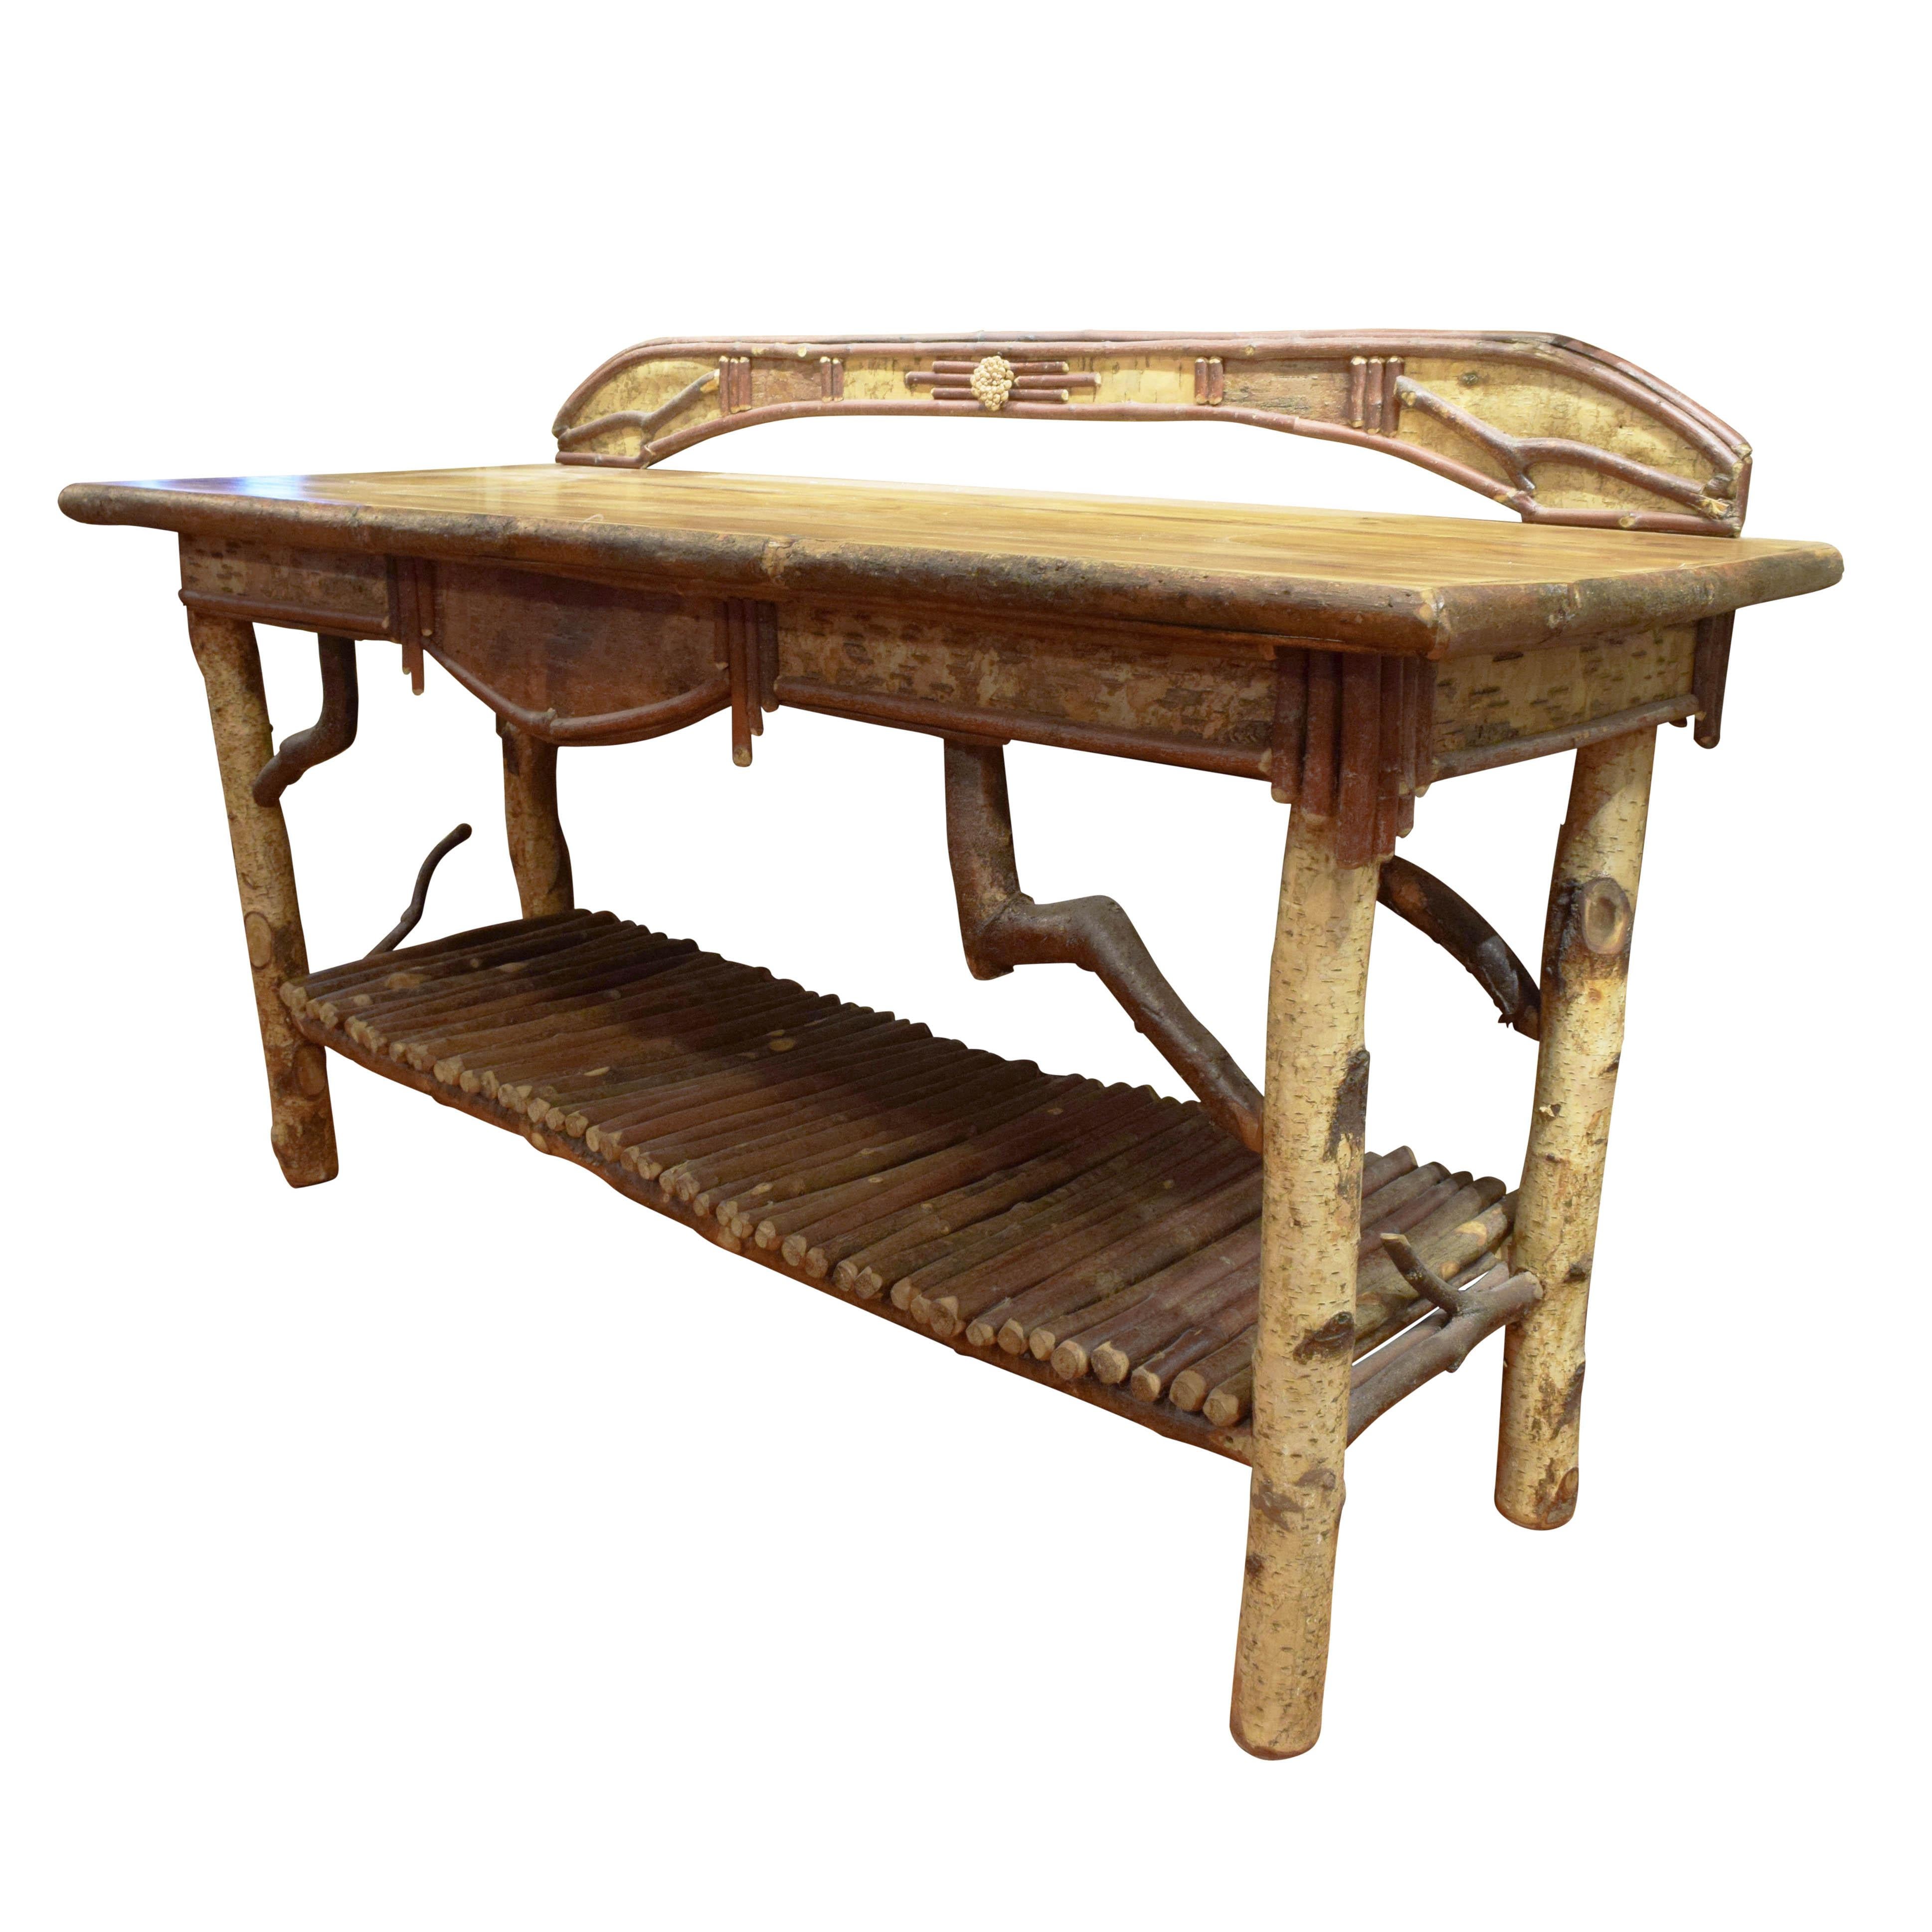 Entry or serving table; birch and willow twig work; top of table, plus 6